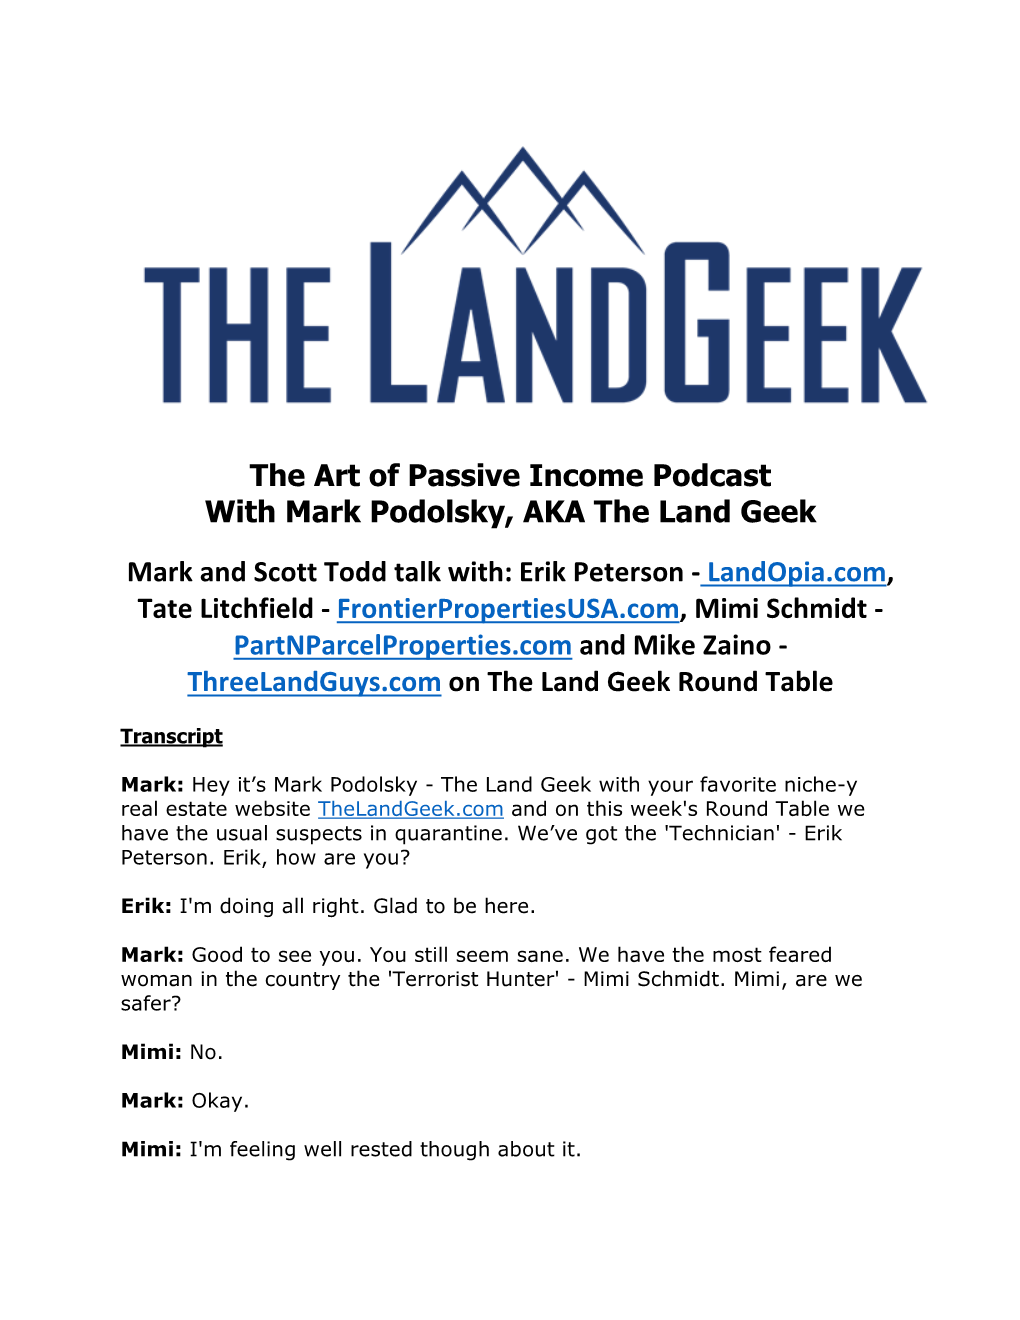 The Art of Passive Income Podcast with Mark Podolsky, AKA the Land Geek Mark and Scott Todd Talk With: Erik Peterson